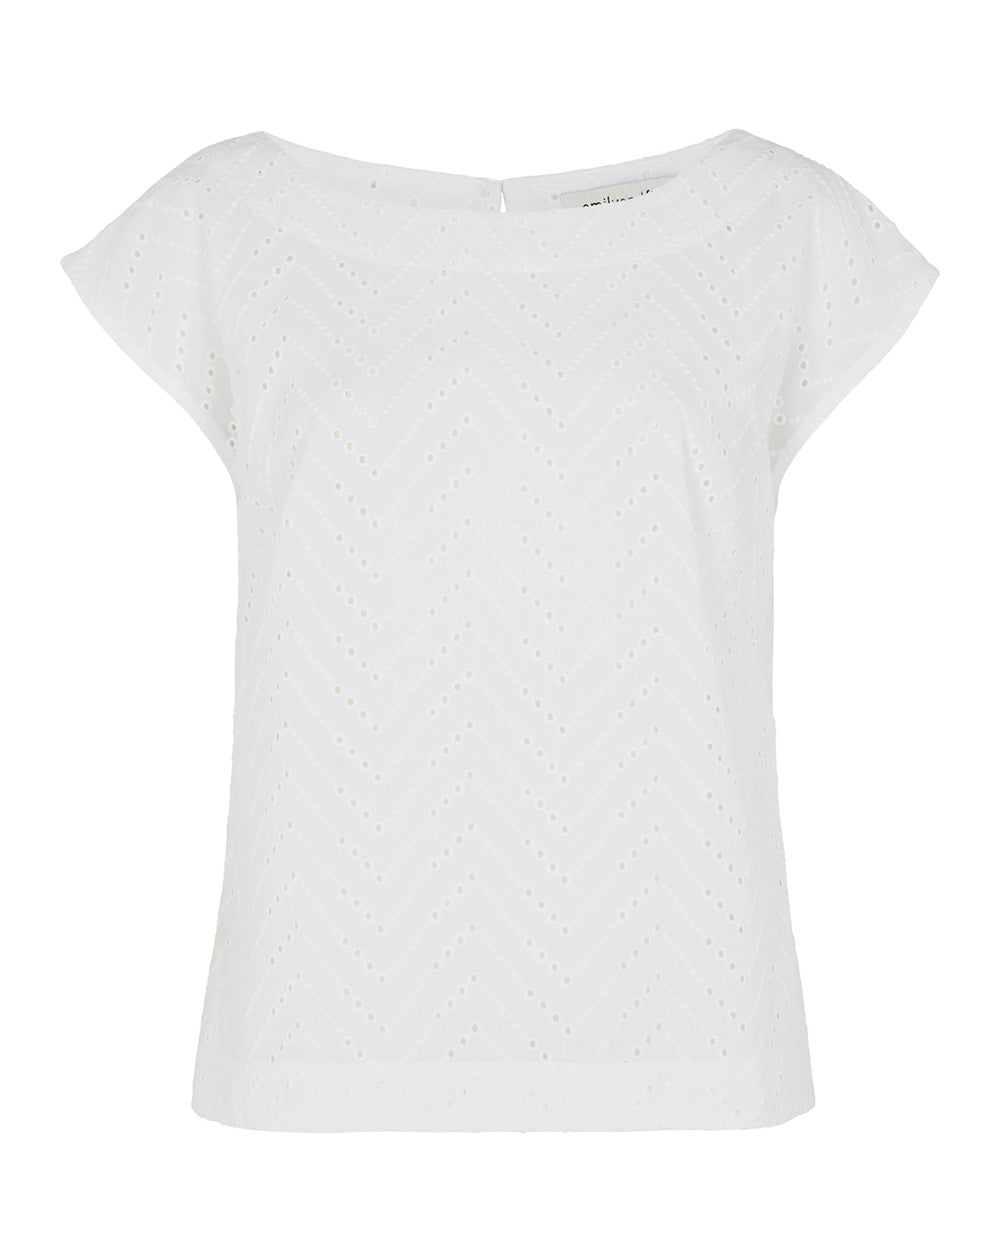 Emily and Fin - Edna Top - Chevron Broderie White